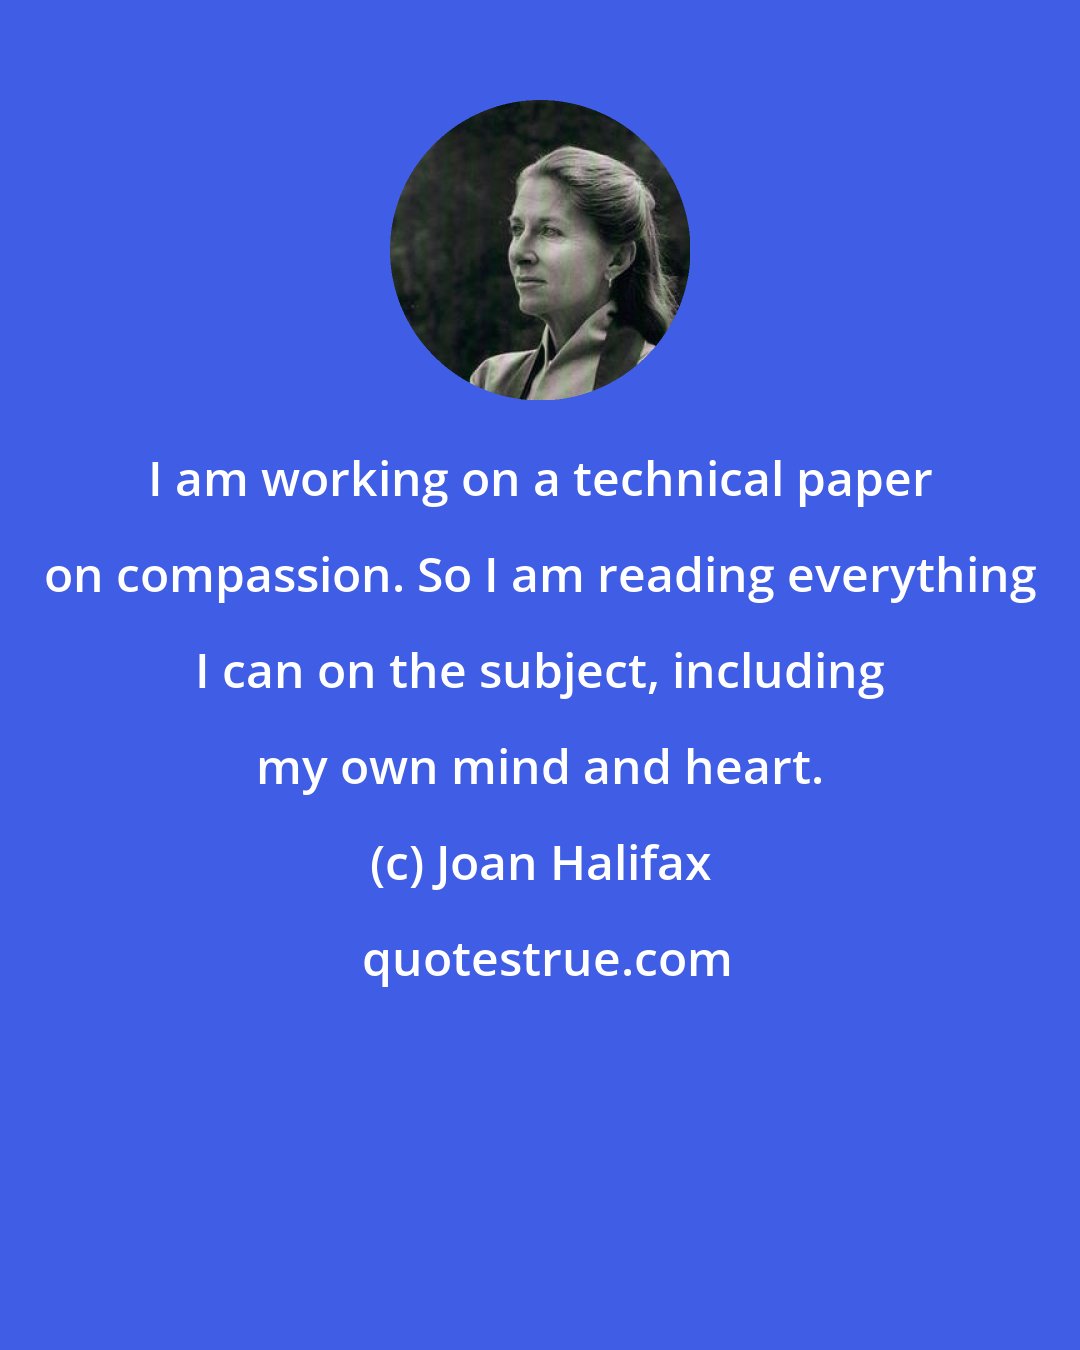 Joan Halifax: I am working on a technical paper on compassion. So I am reading everything I can on the subject, including my own mind and heart.